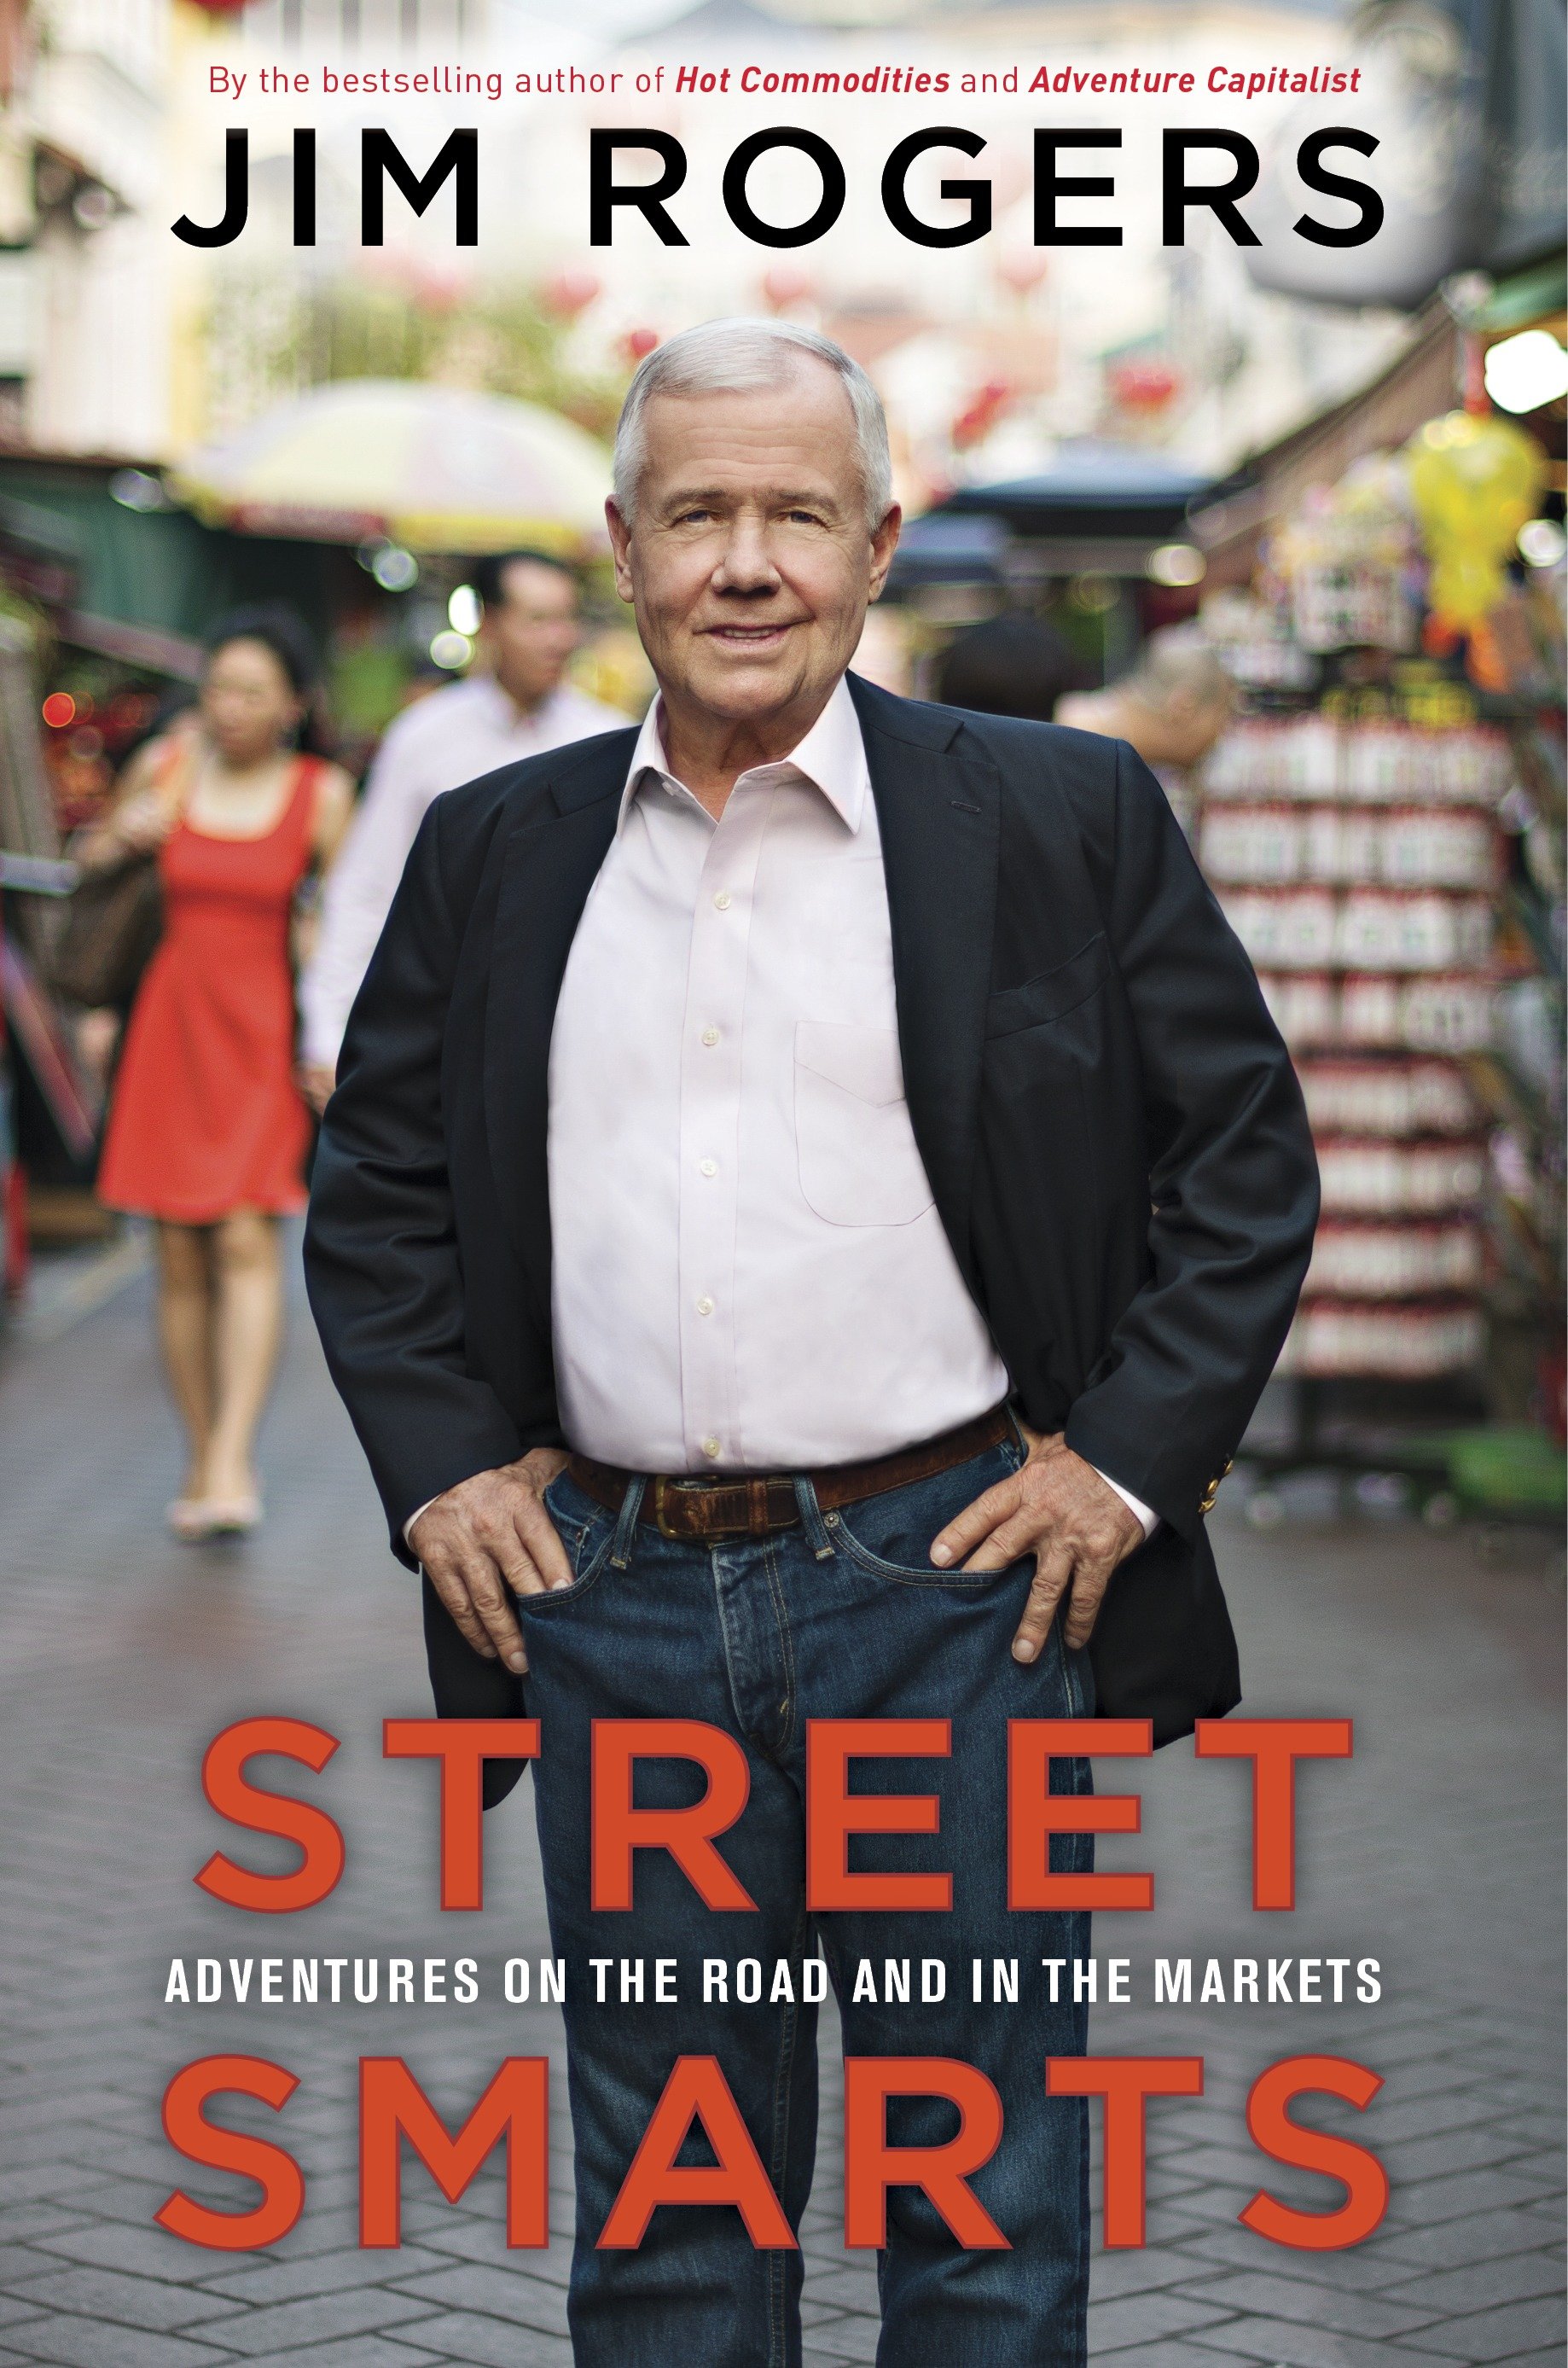 Street smarts adventures on the road and in the markets cover image